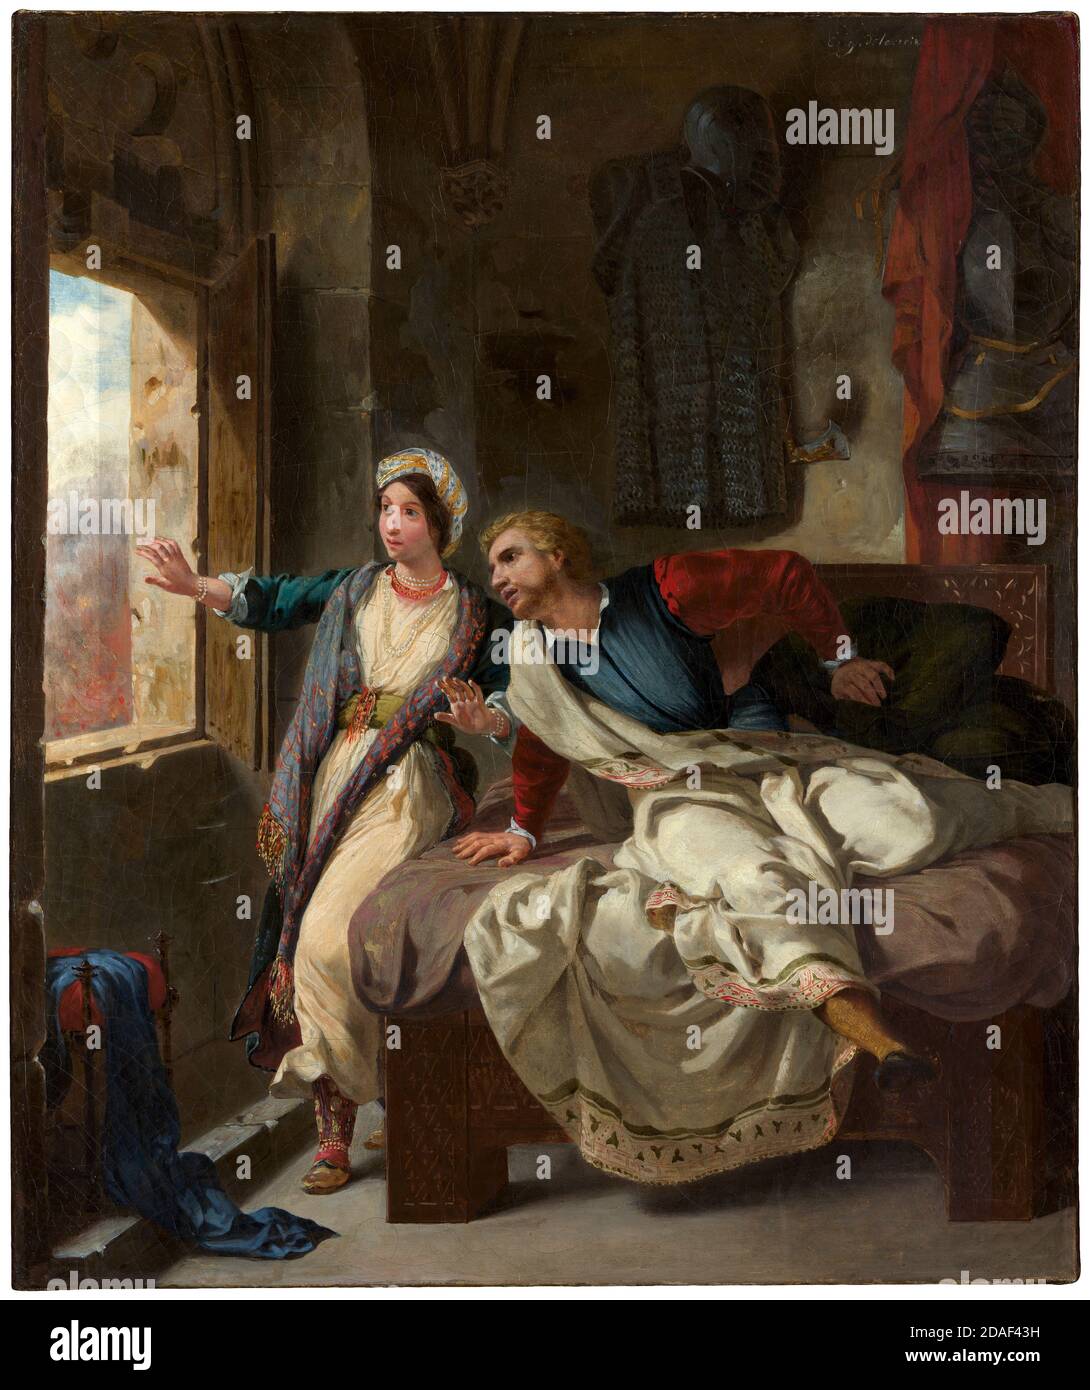 Eugene Delacroix, Rebecca and the Wounded Ivanhoe, painting, 1823 Stock Photo